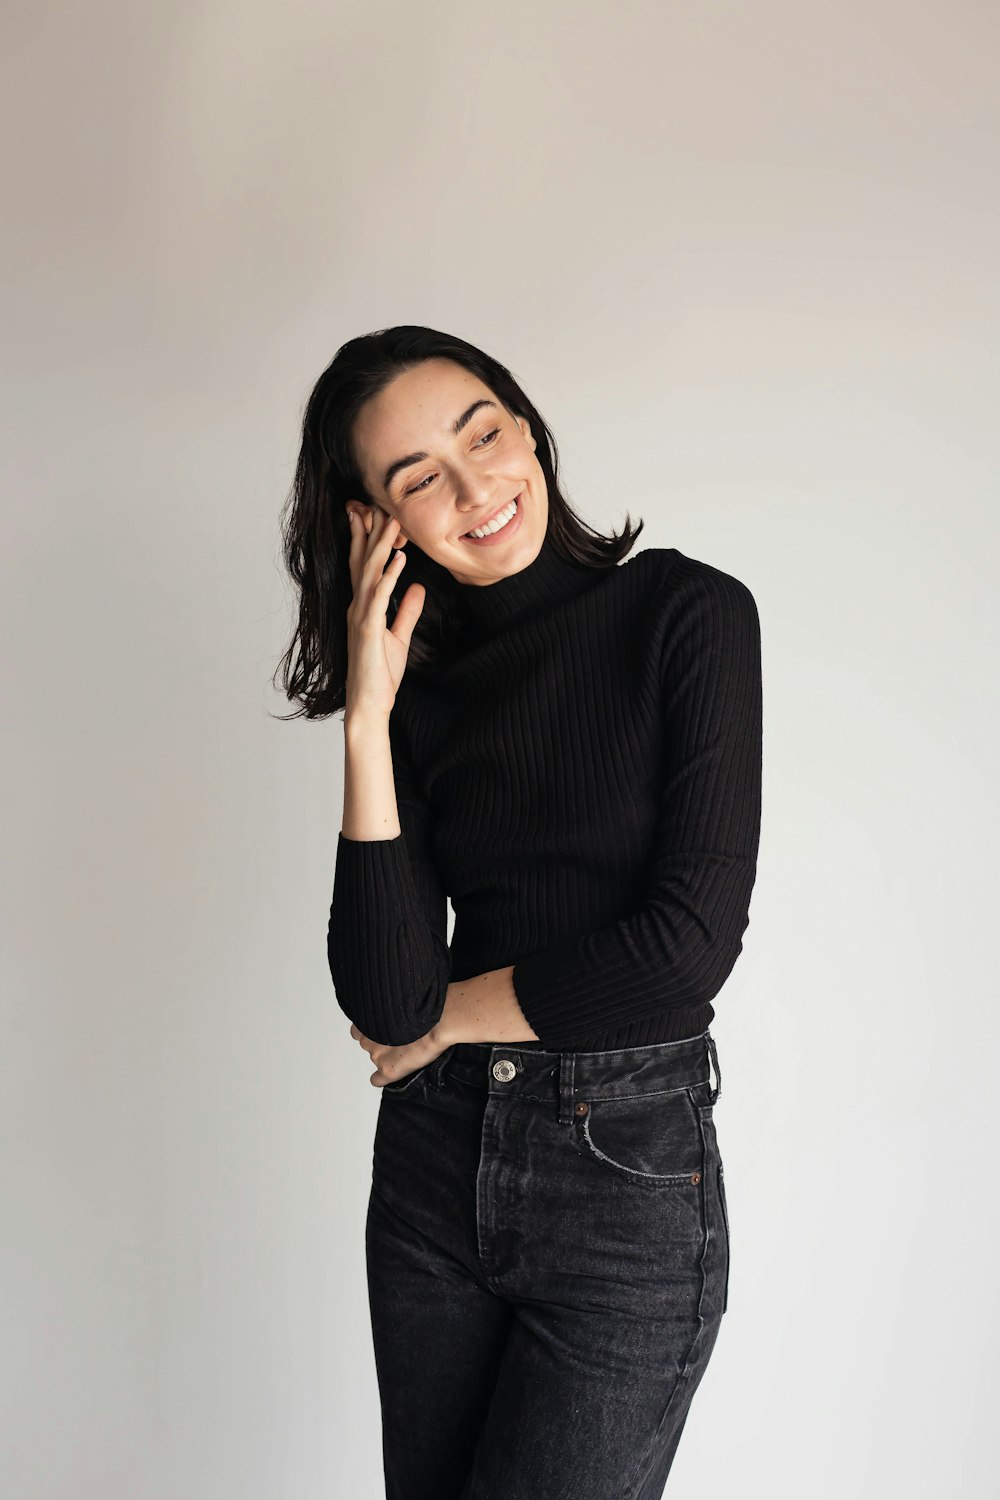 a woman in a black sweater and jeans talking on a cell phone